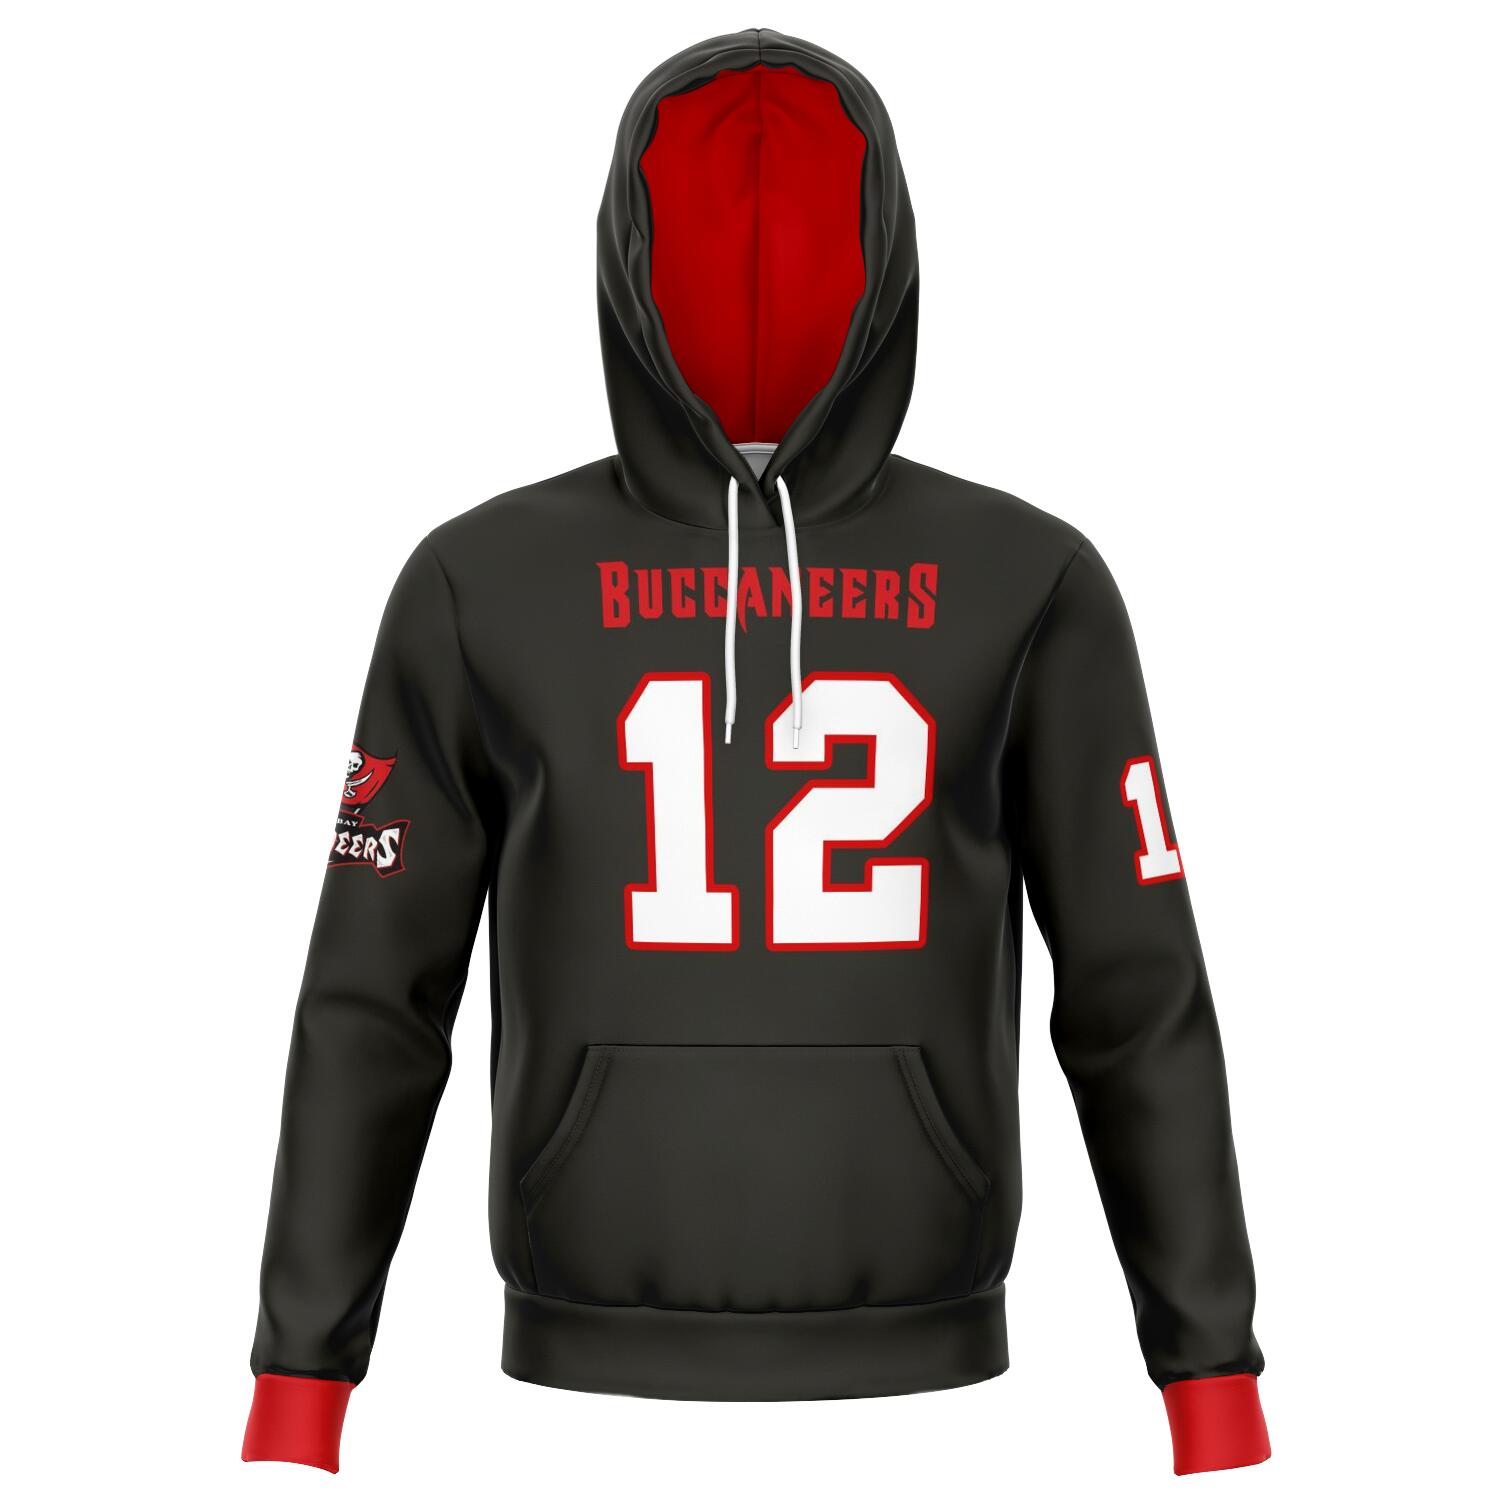 Tampa Bay Inspired Hoodie